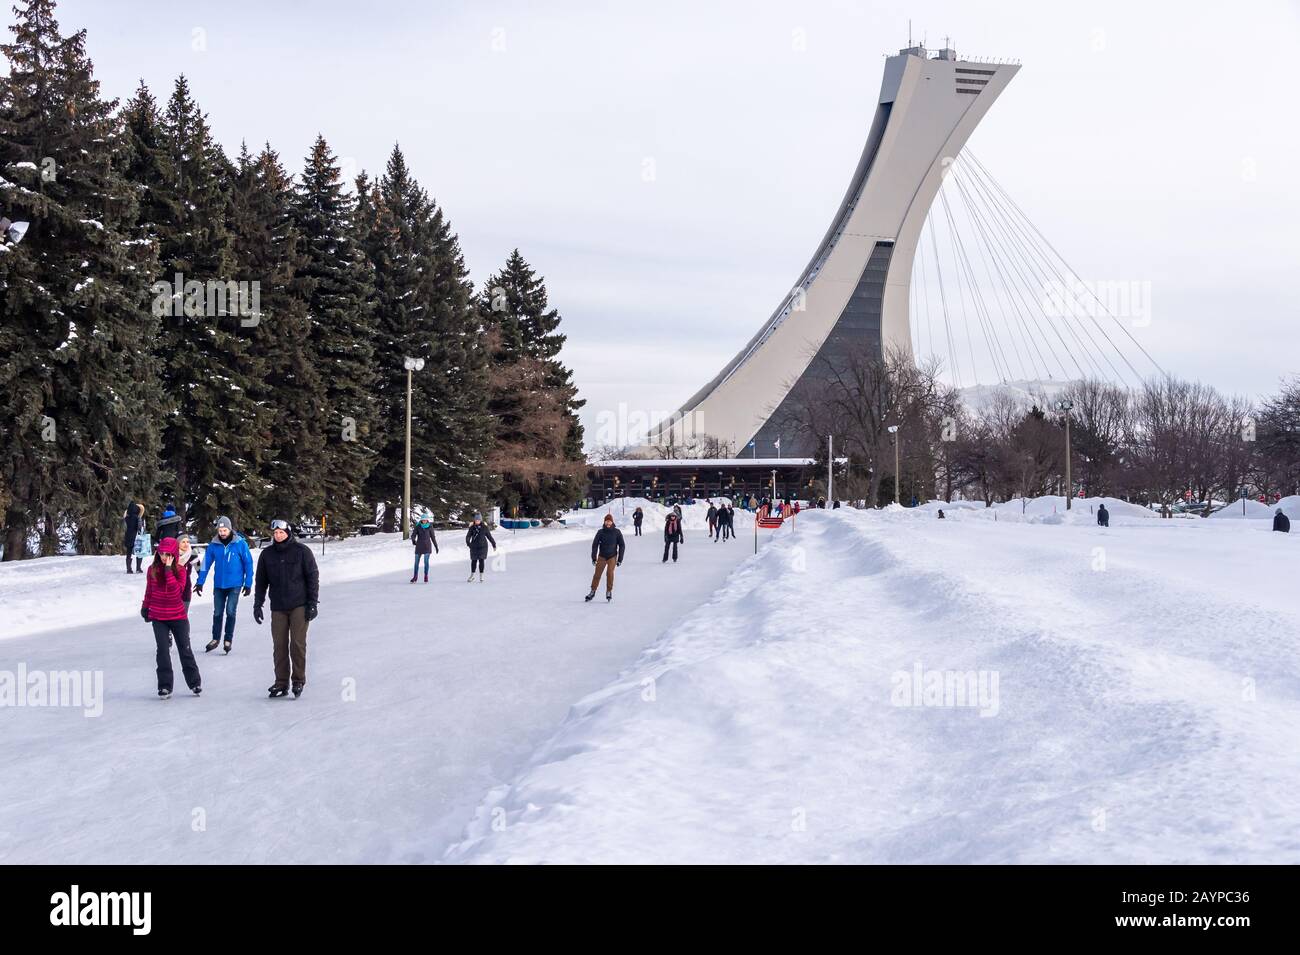 Montreal, CA - 15 February 2020: People  ice skating at the Park Maisonneuve ice rink with olympic Stadium Tower in background. Stock Photo